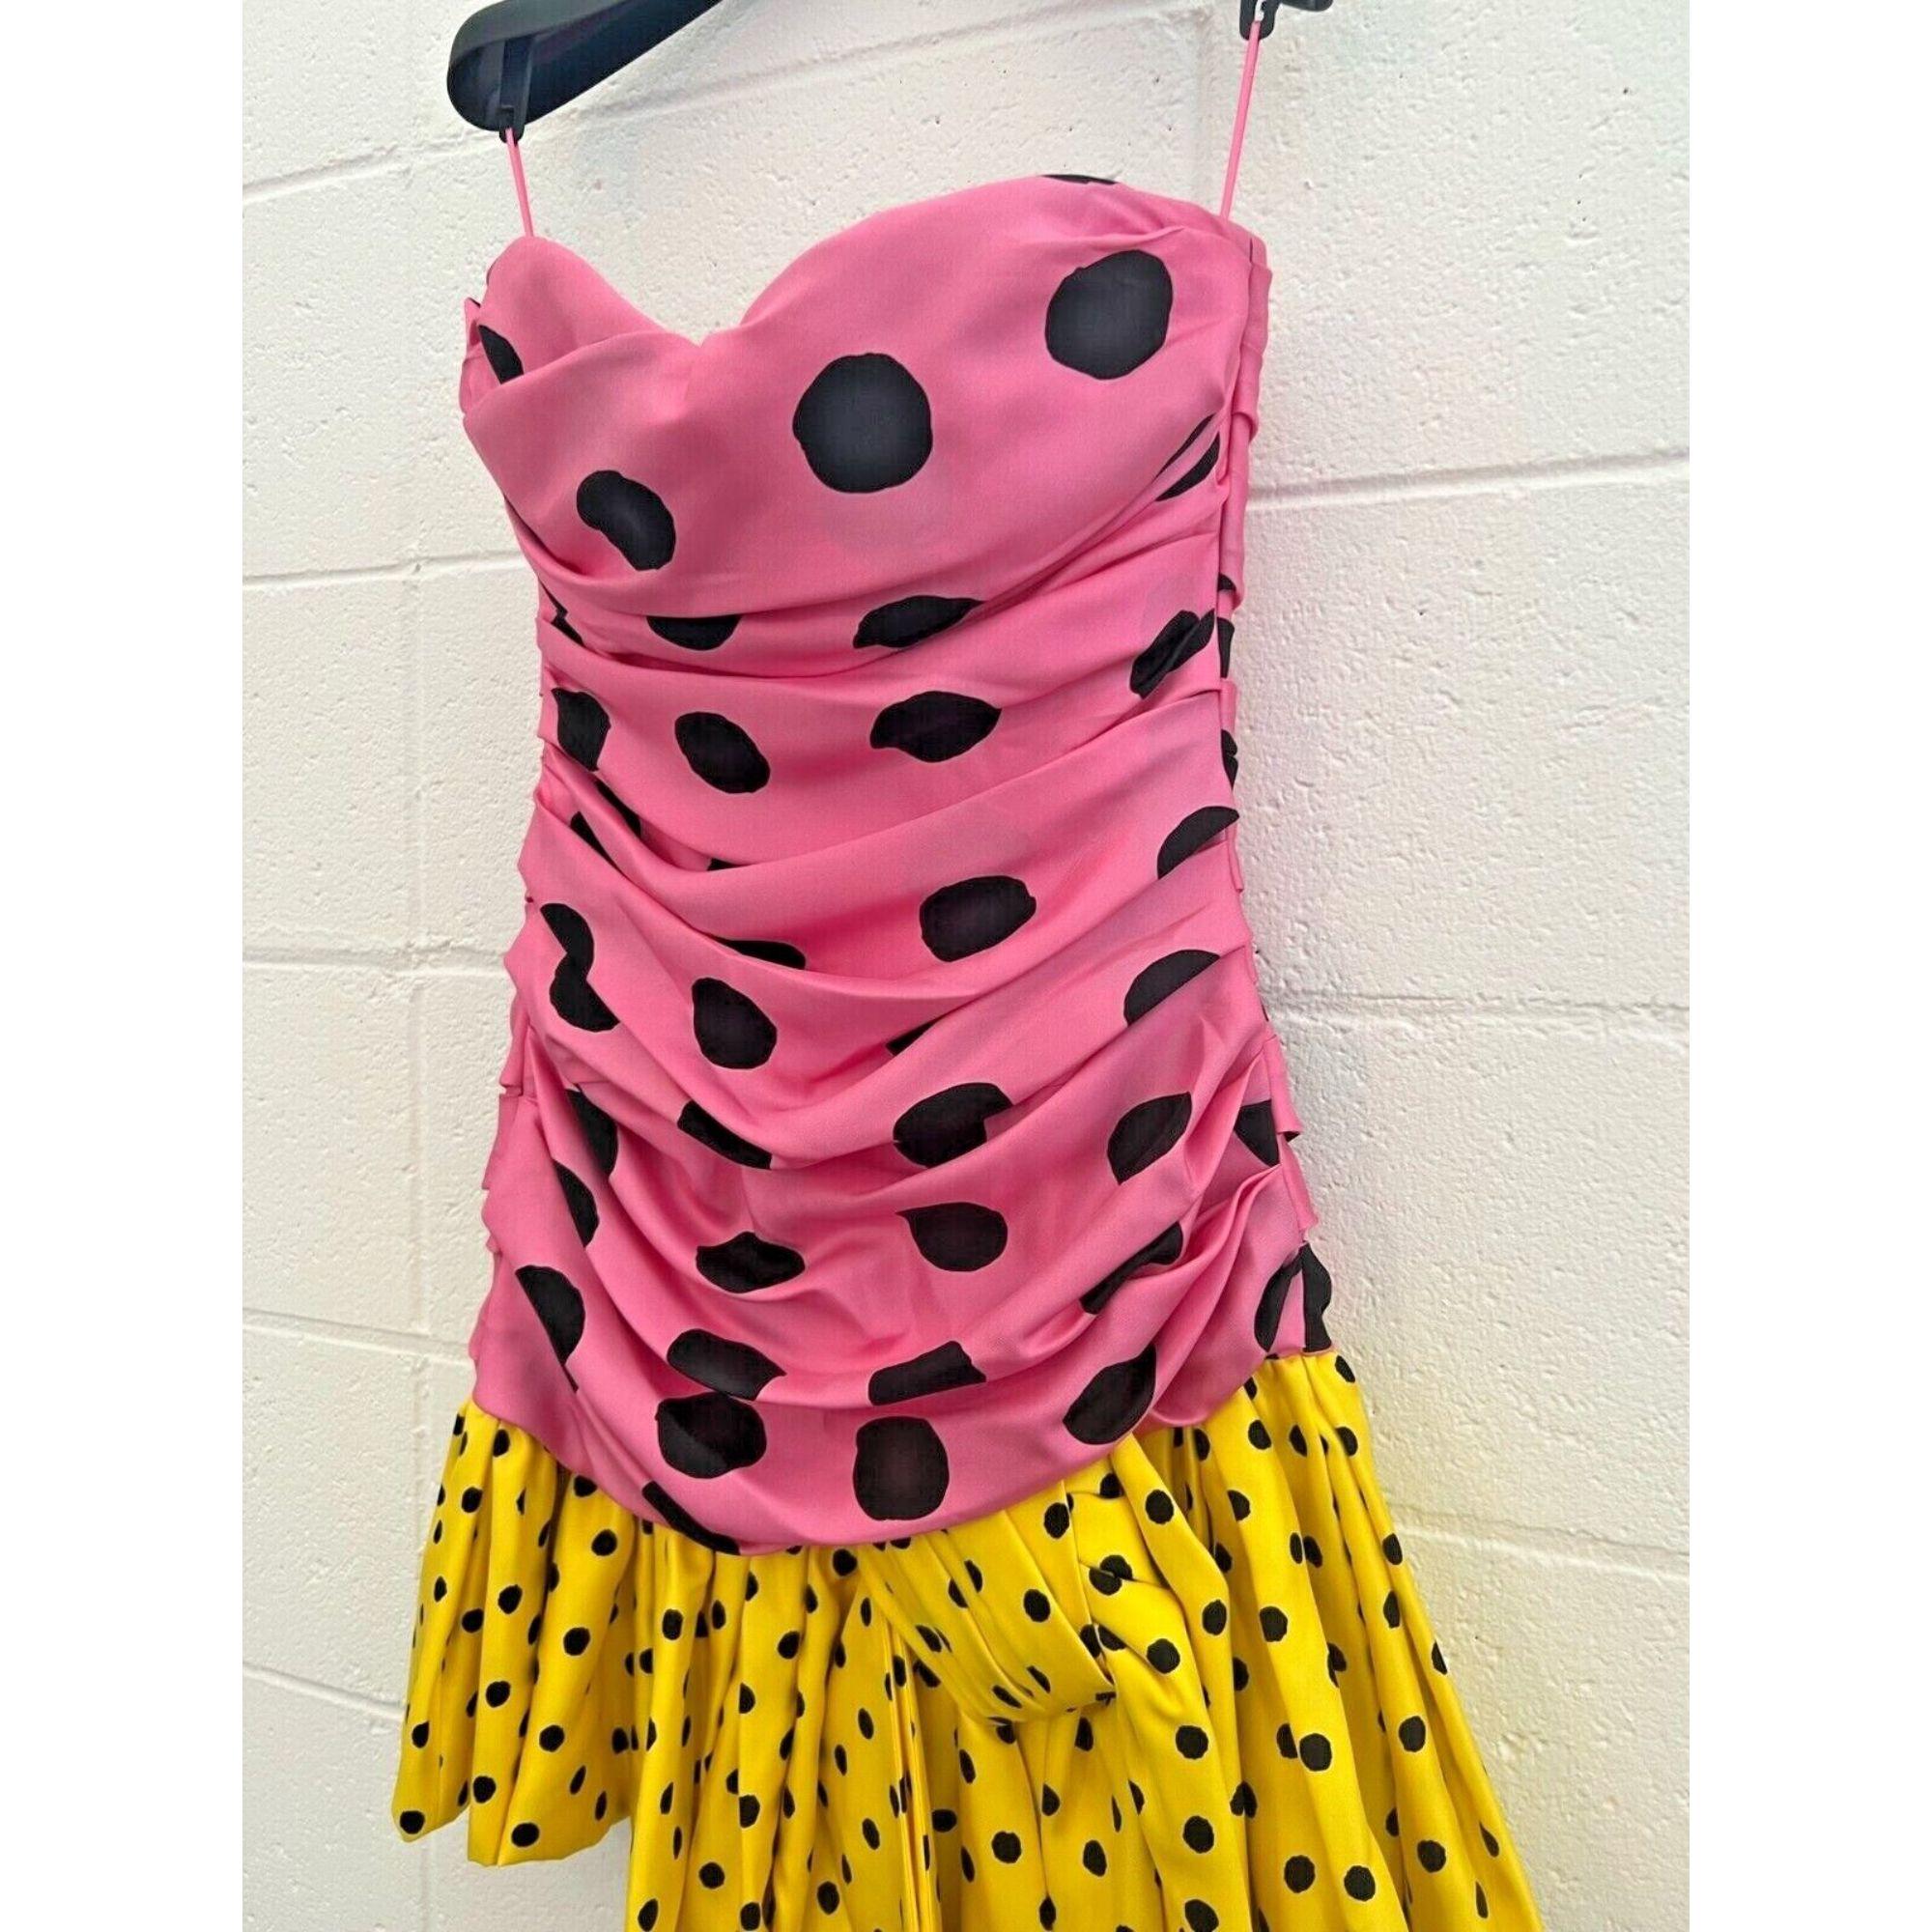 Women's SS21 Moschino Couture Pink Yellow Strapless Polka Dot Mini Dress by Jeremy Scott For Sale